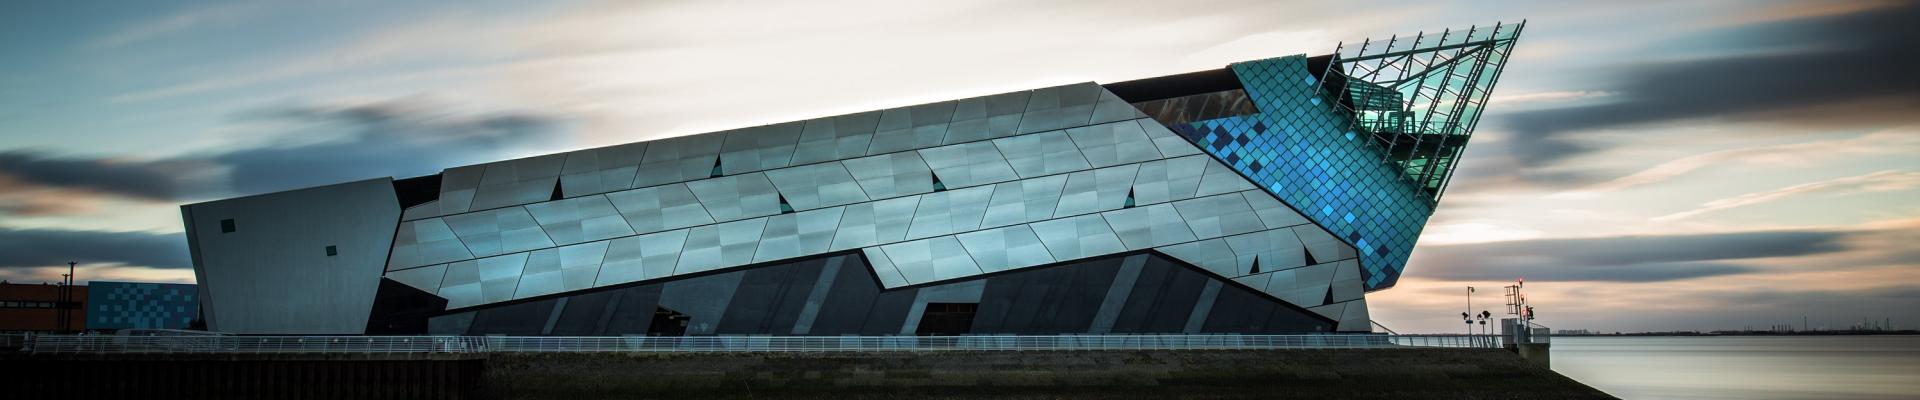 The Deep building exterior overlooking the Humber Estuary at dusk.